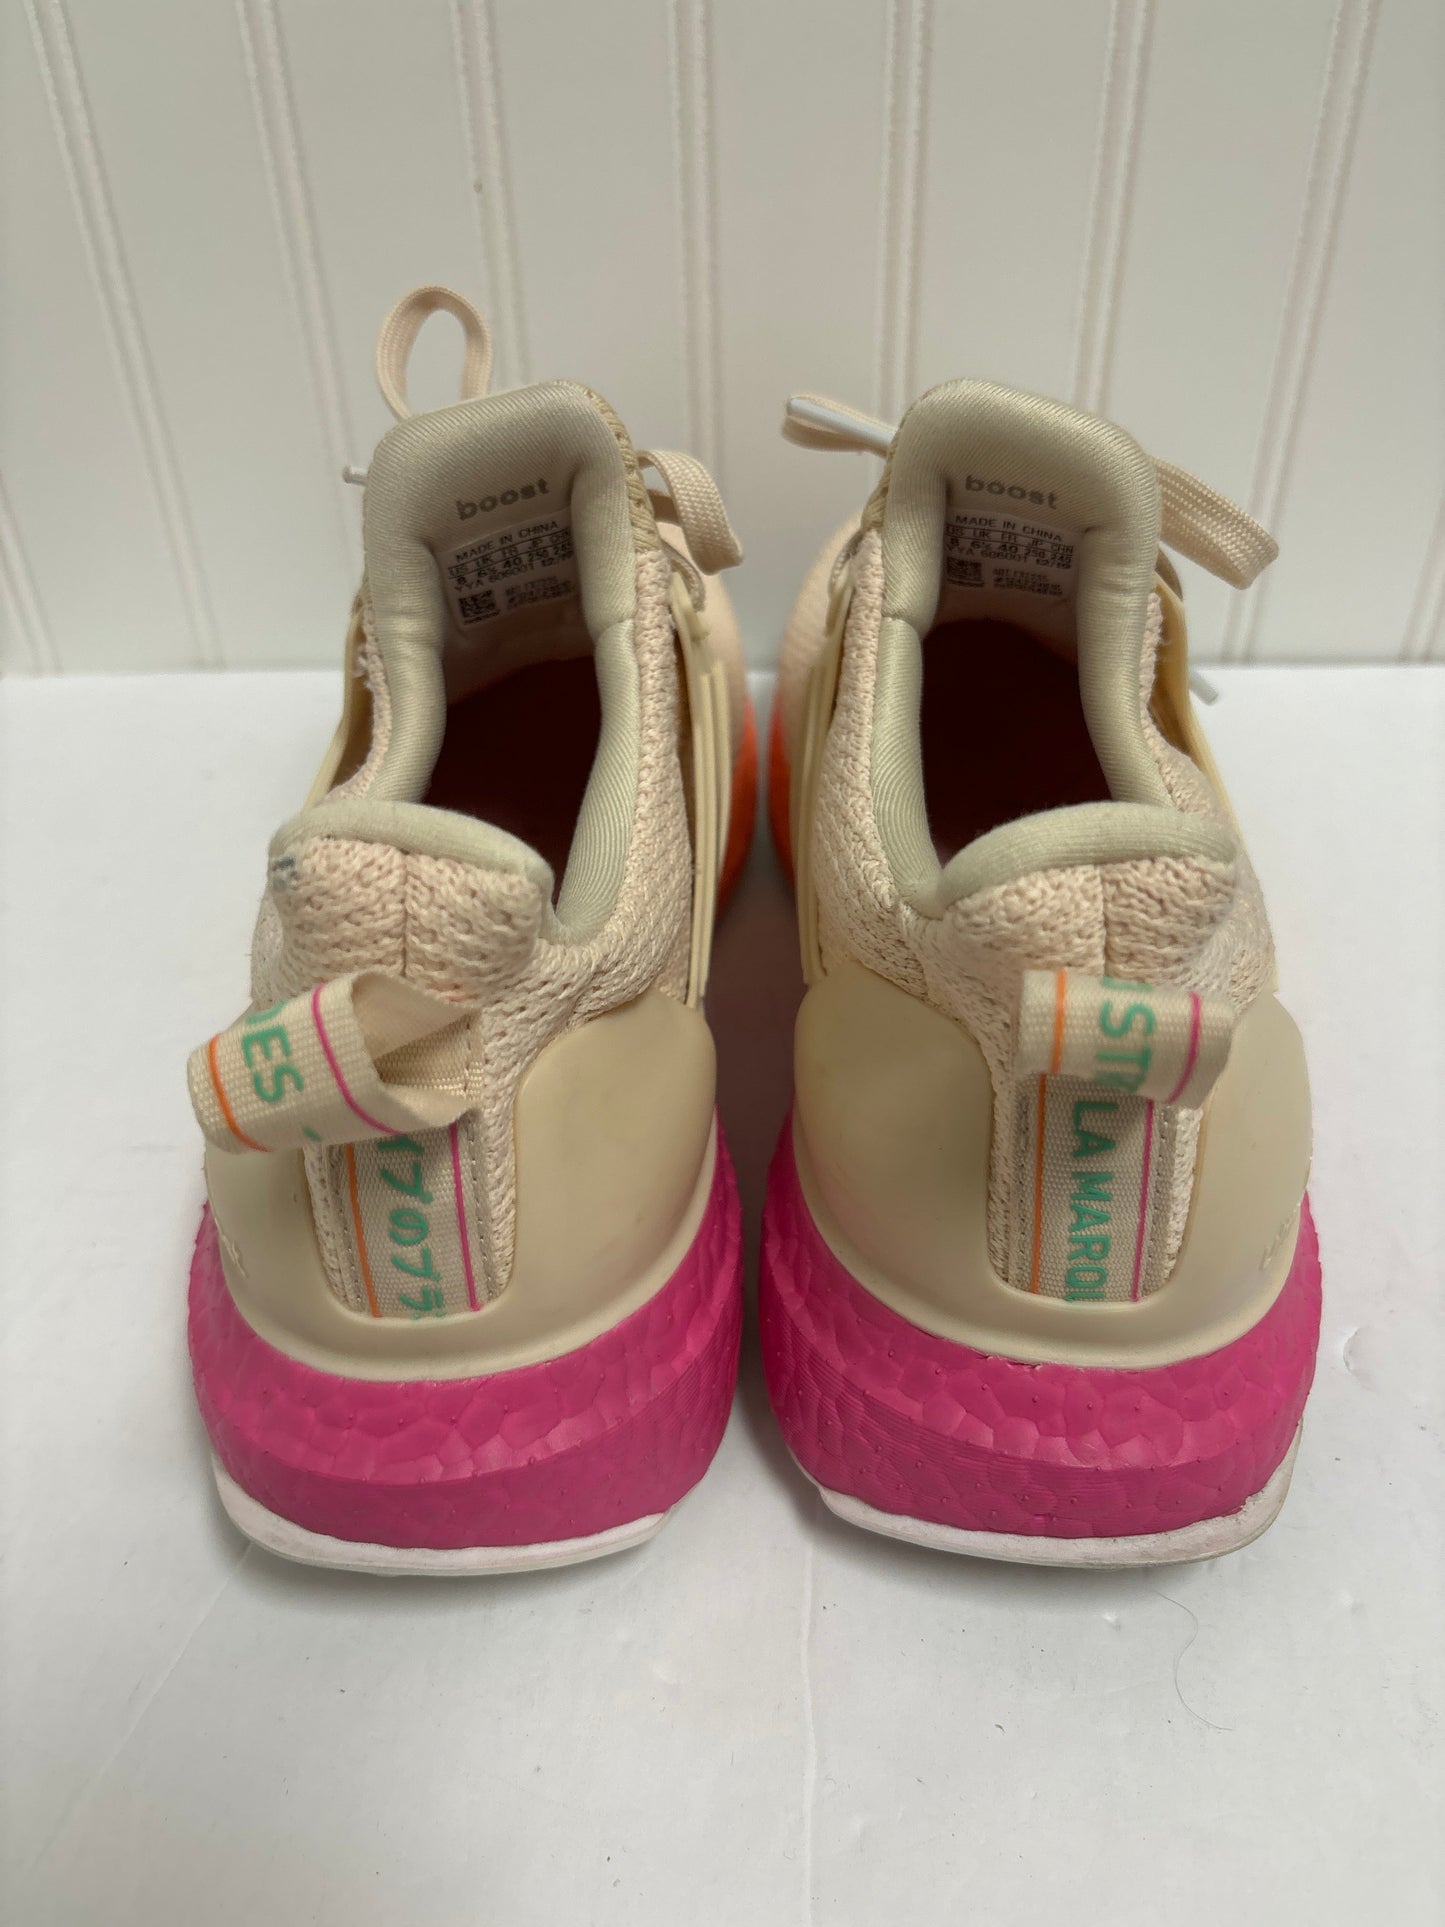 Peach Shoes Athletic Adidas, Size 8